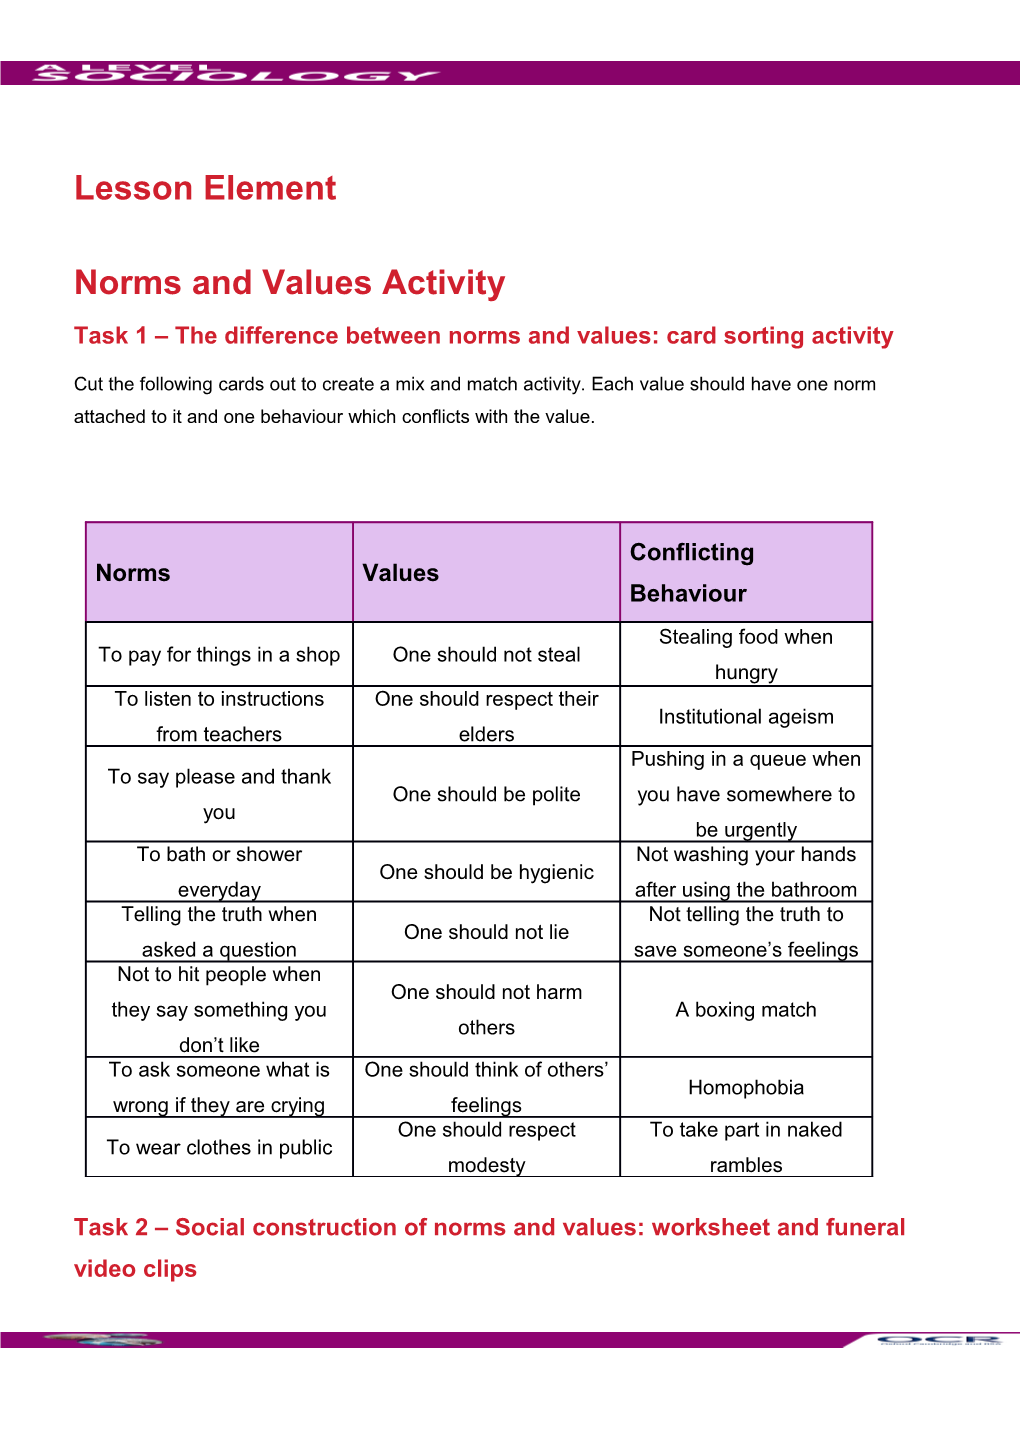 A Level Sociology Lesson Element Learner Activity (Norms and Values Activity)